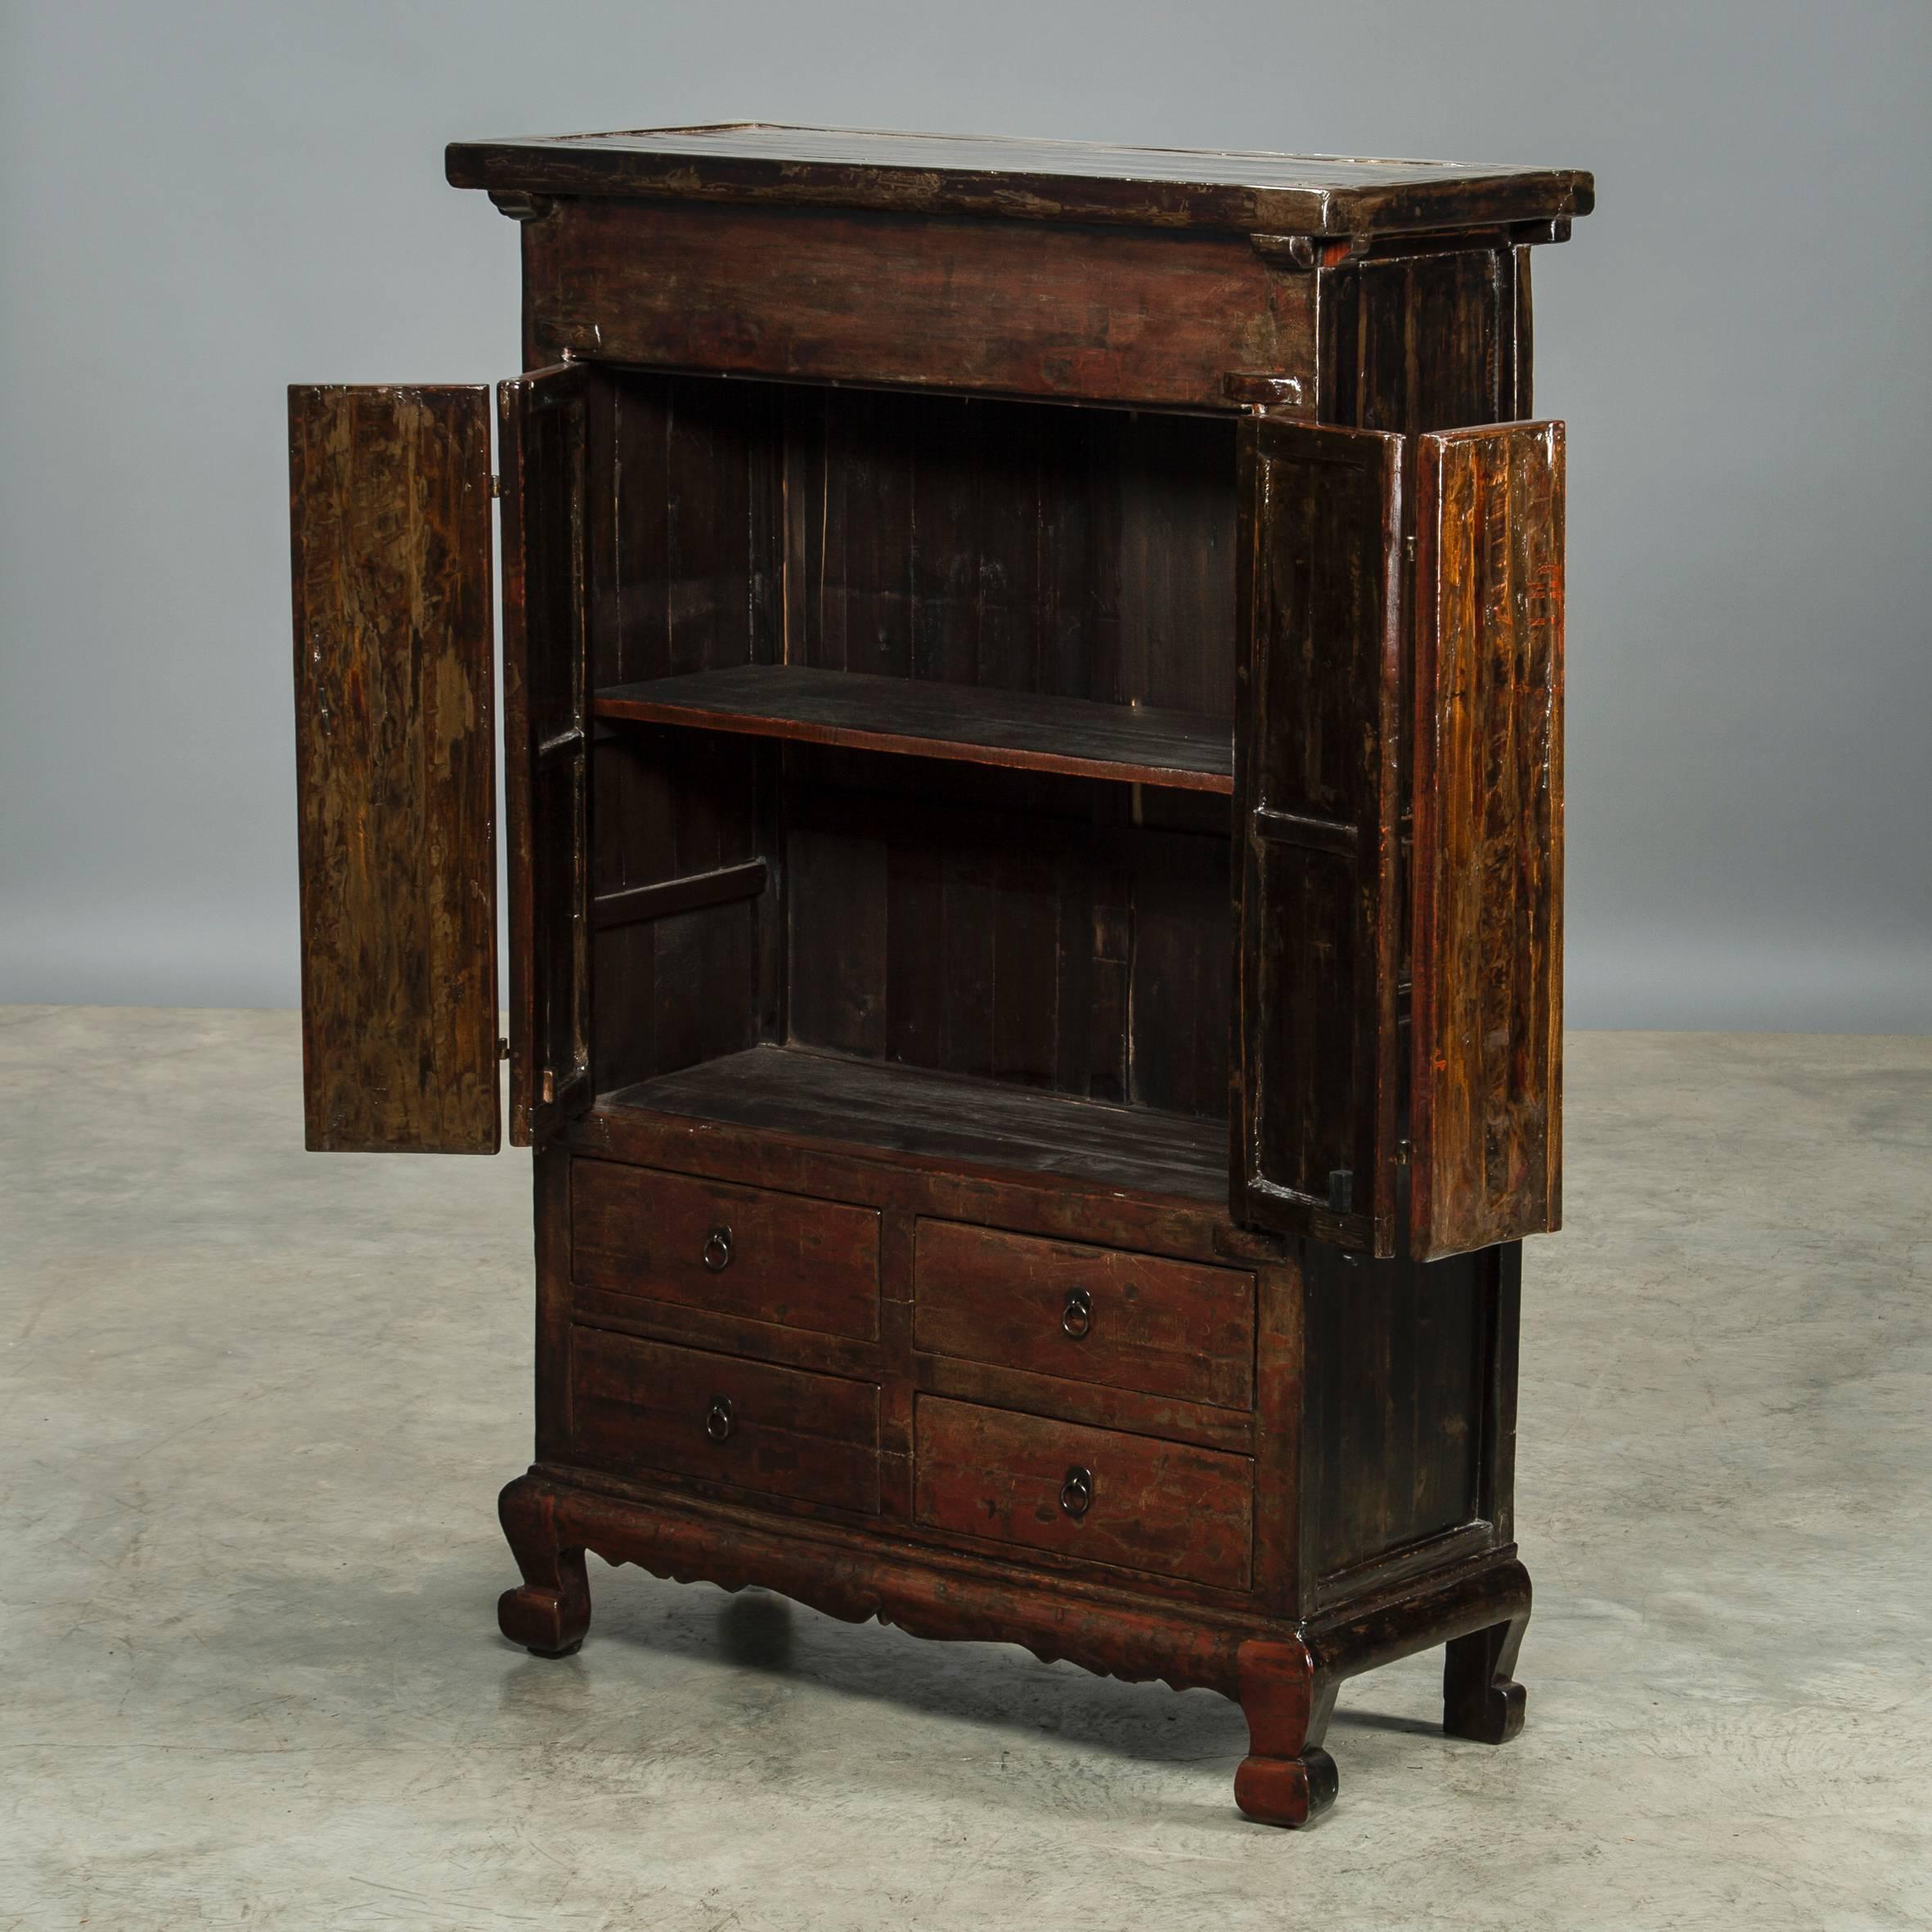 Cabinet from Shanxi with deep red lacquer front (thick lacquer) and black lacquer sides. A pair of doors and 4 drawers. The natural wear and tear on the thick lacquer gives the cabinet a fascinating charisma and patina, Shanxi, circa 1820.